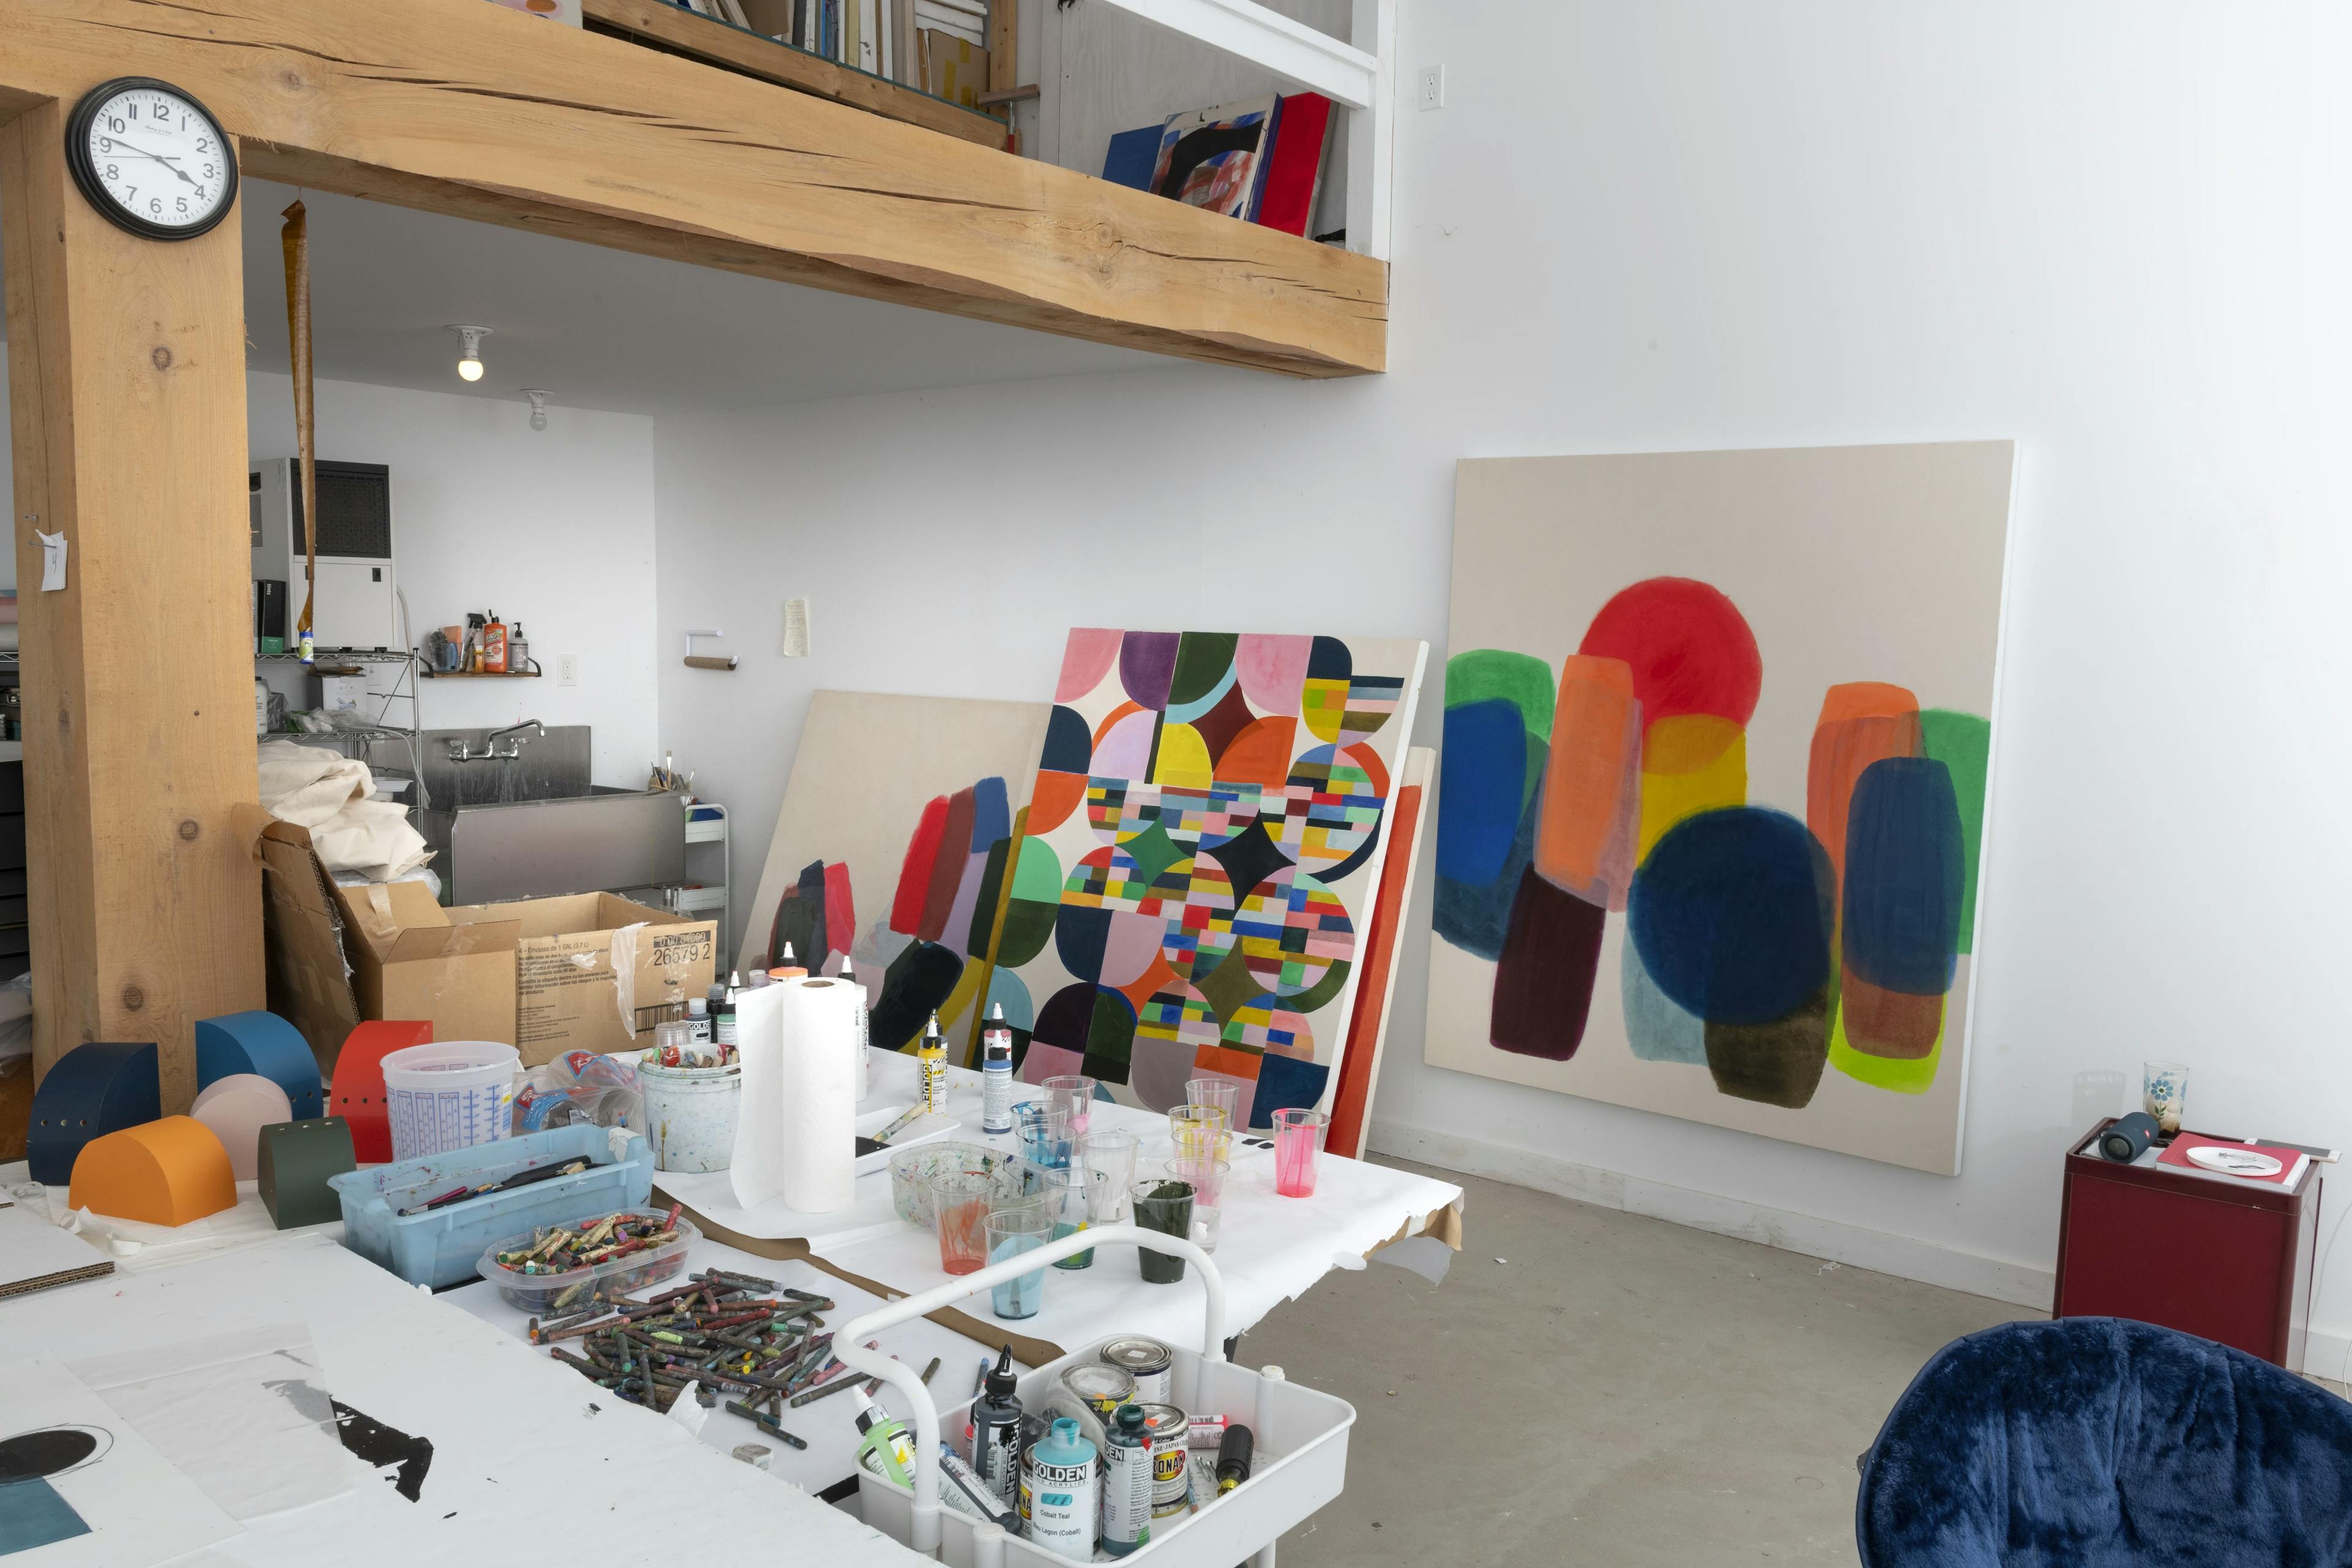 Large, abstract colorful paintings by artist Vicki Sher leaning against a white wall in her studio.